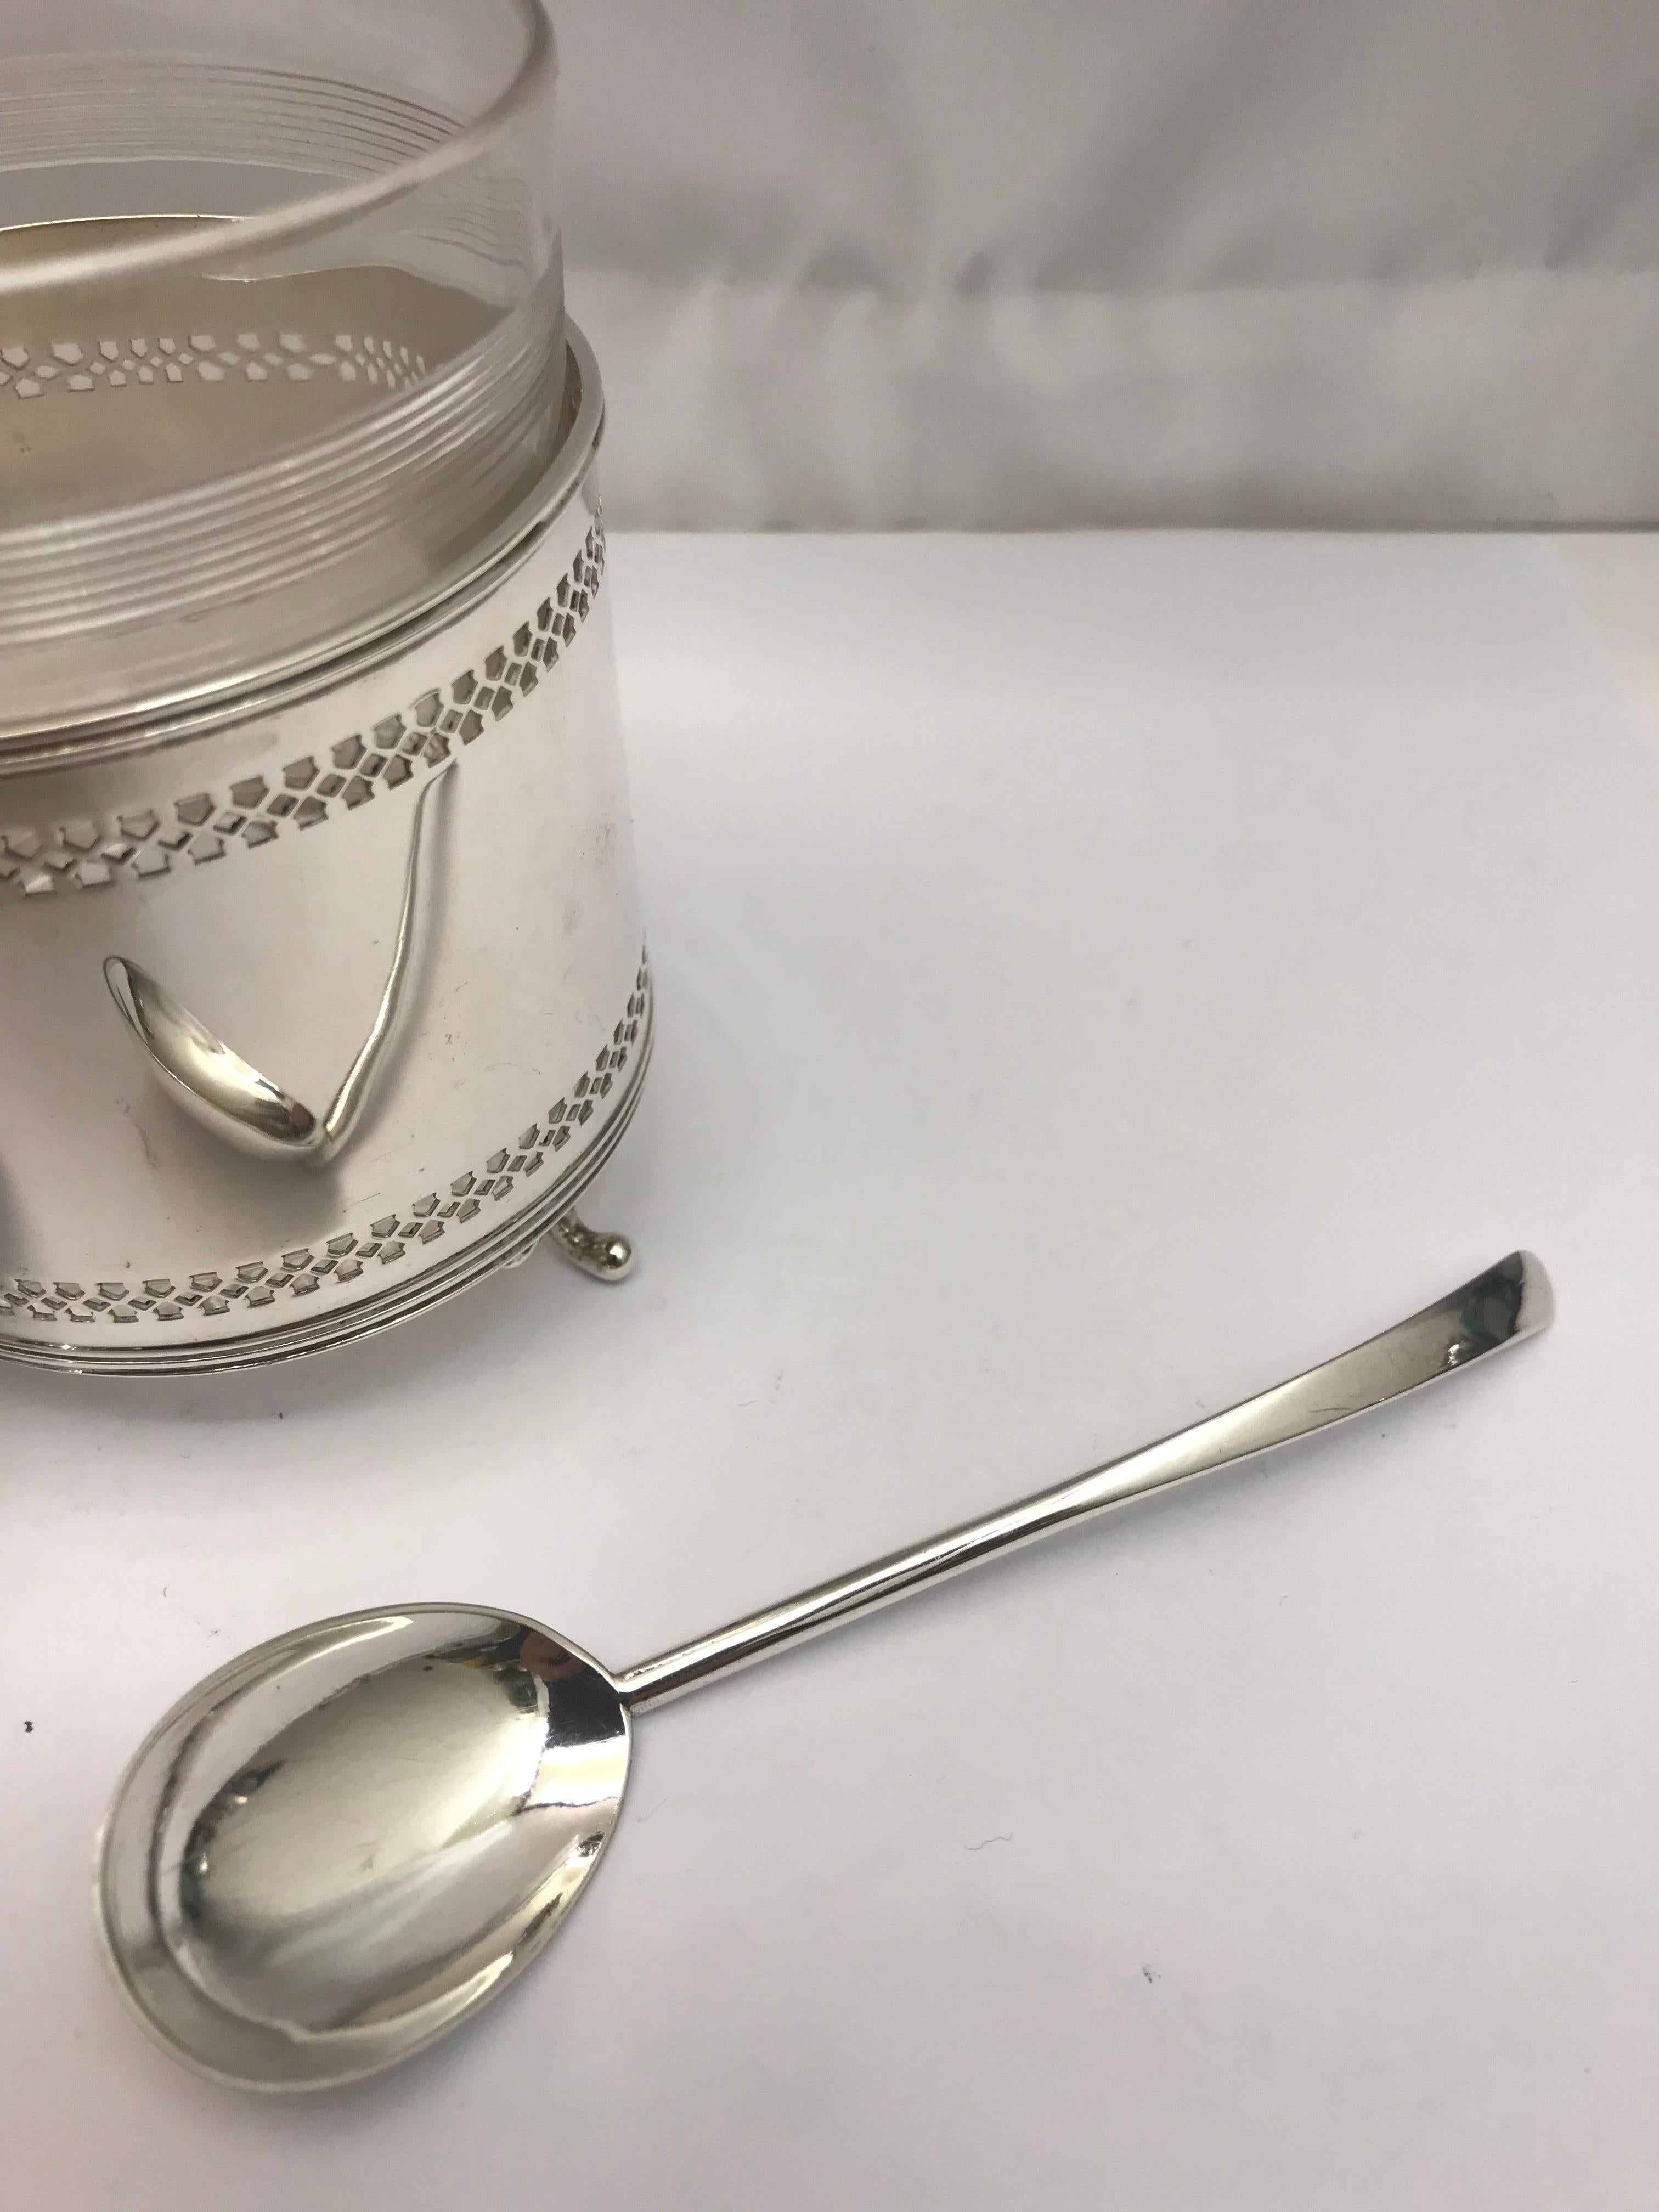 An antique silver and glass pot/mustard pot with cover and spoon. 

Sitting on 3 small silver ball feet.

Made in England, 1919.